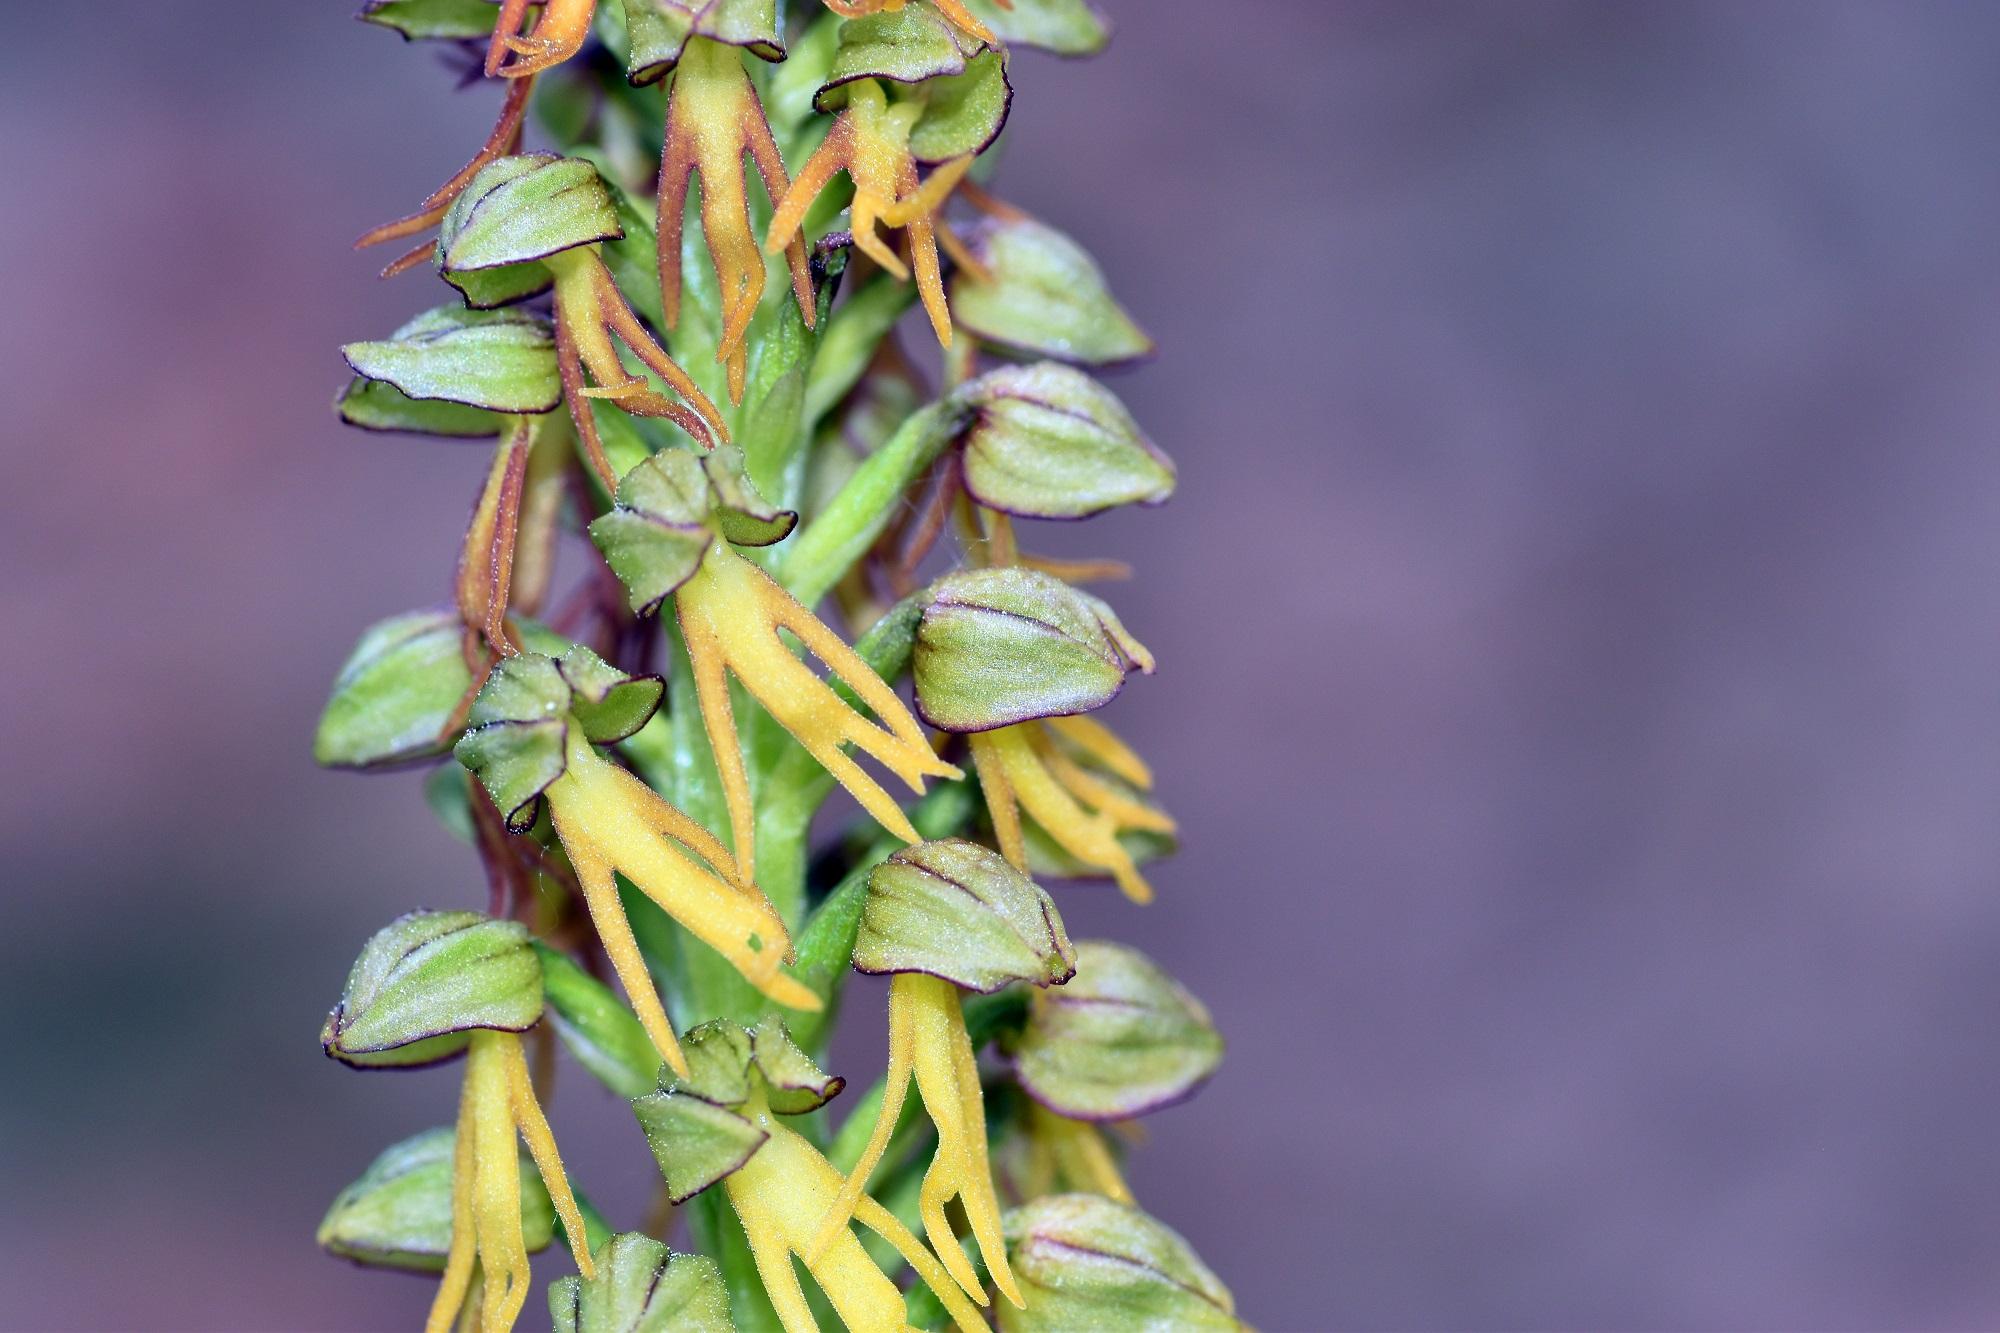 Photograph of a Man Orchid